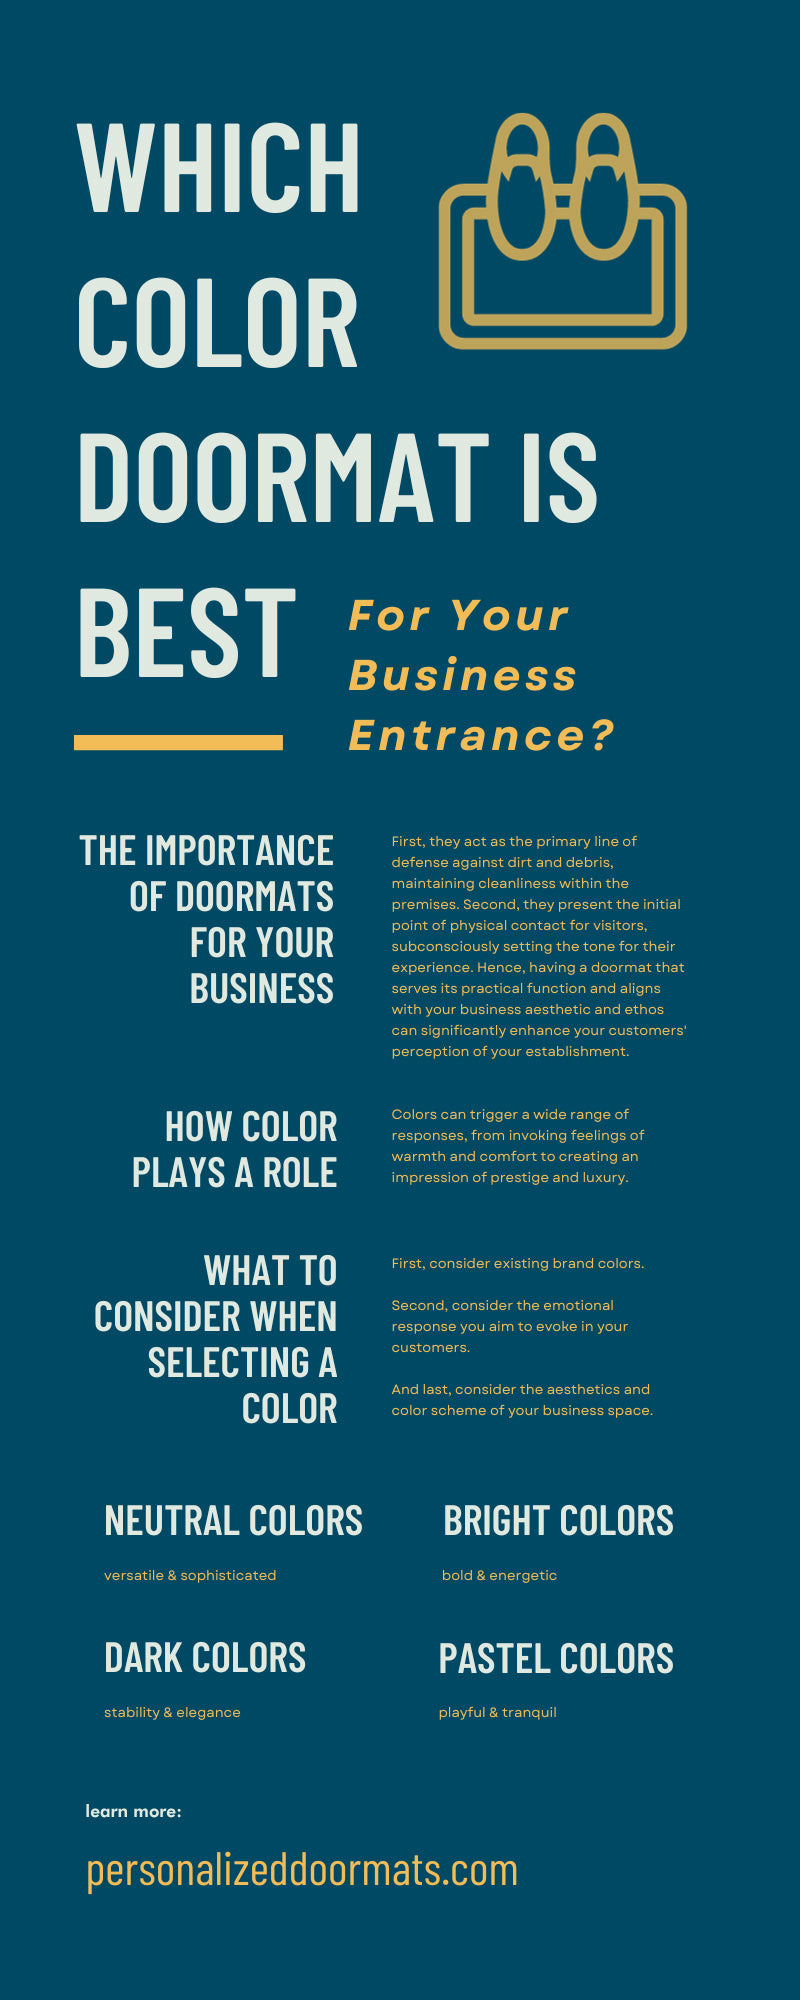 Which Color Doormat Is Best for Your Business Entrance?